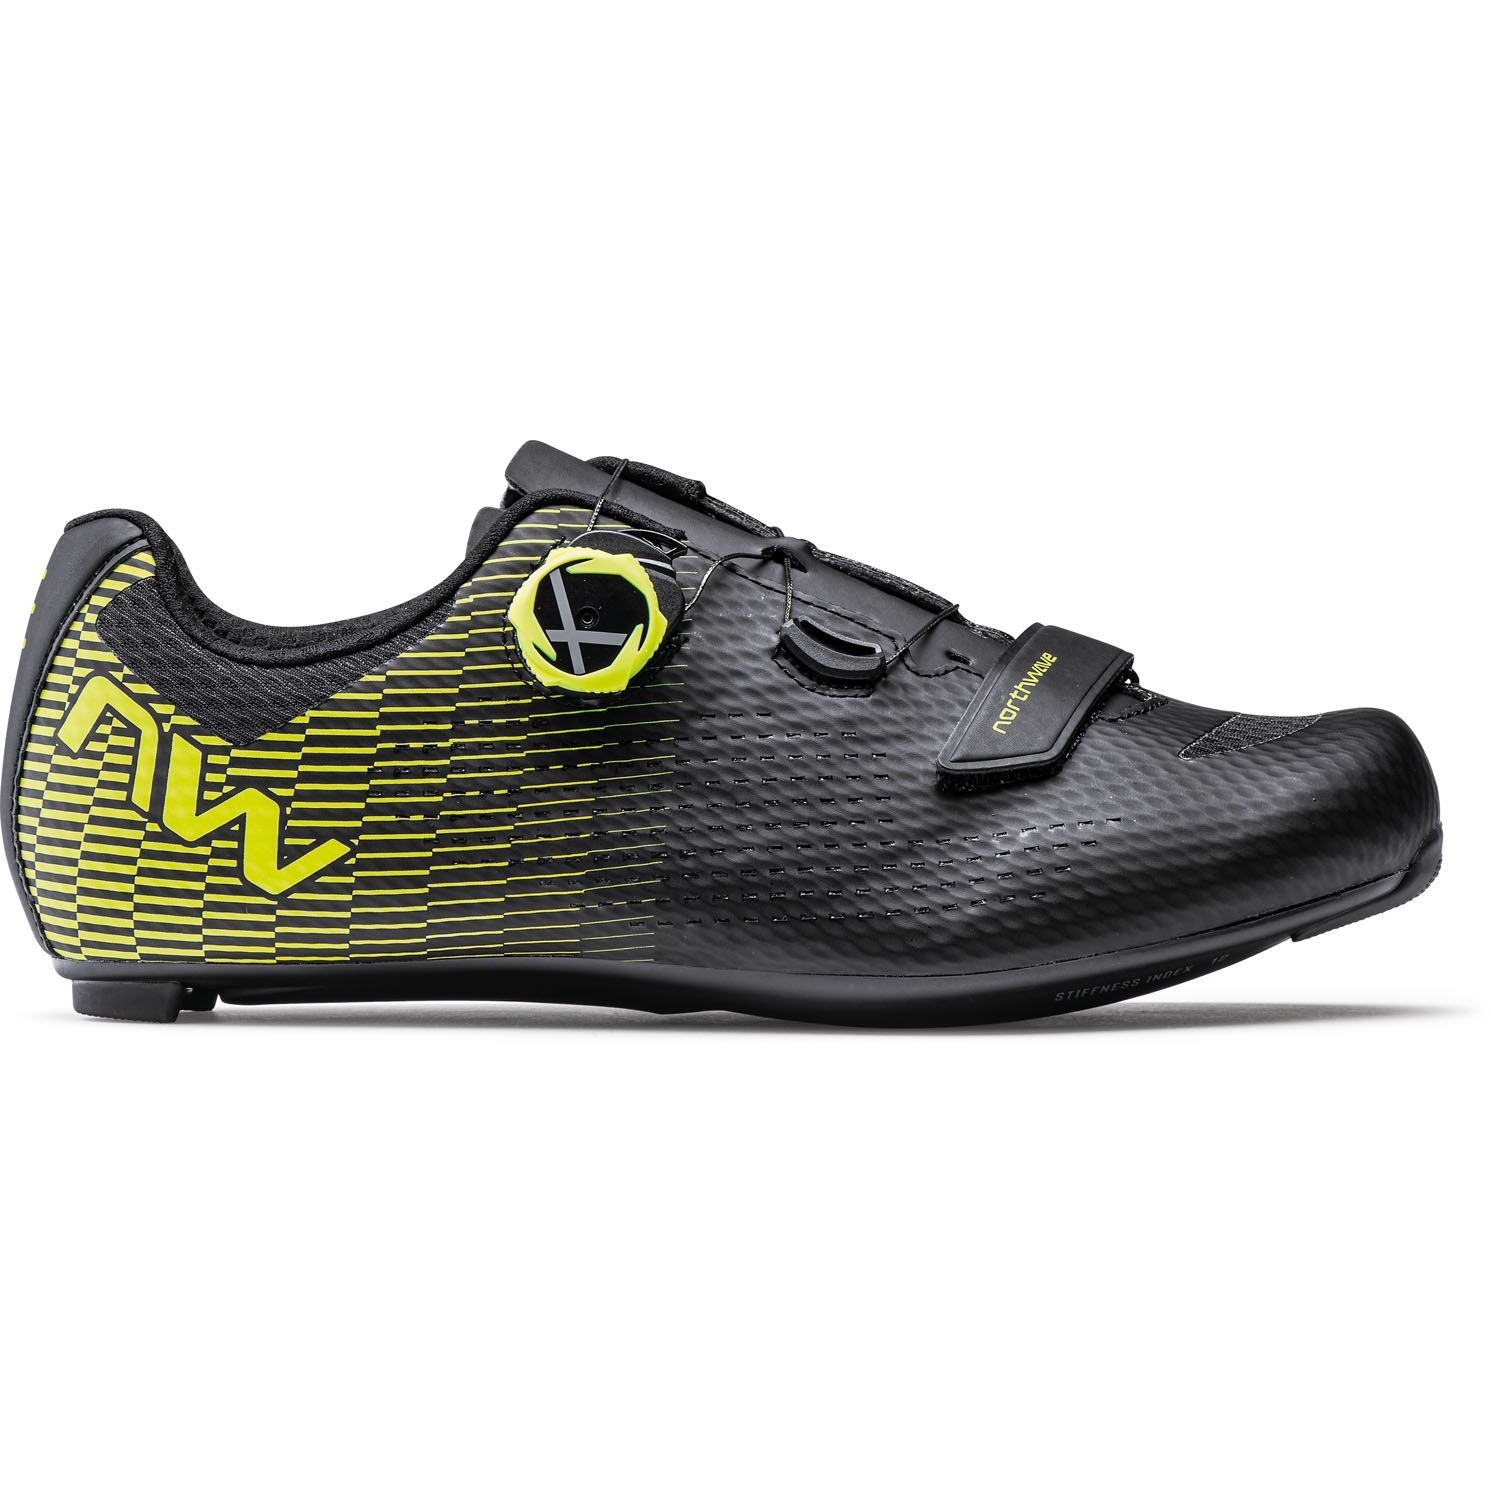 Picture of Northwave Storm Carbon 2 Road Shoes Men - black/yellow fluo 04